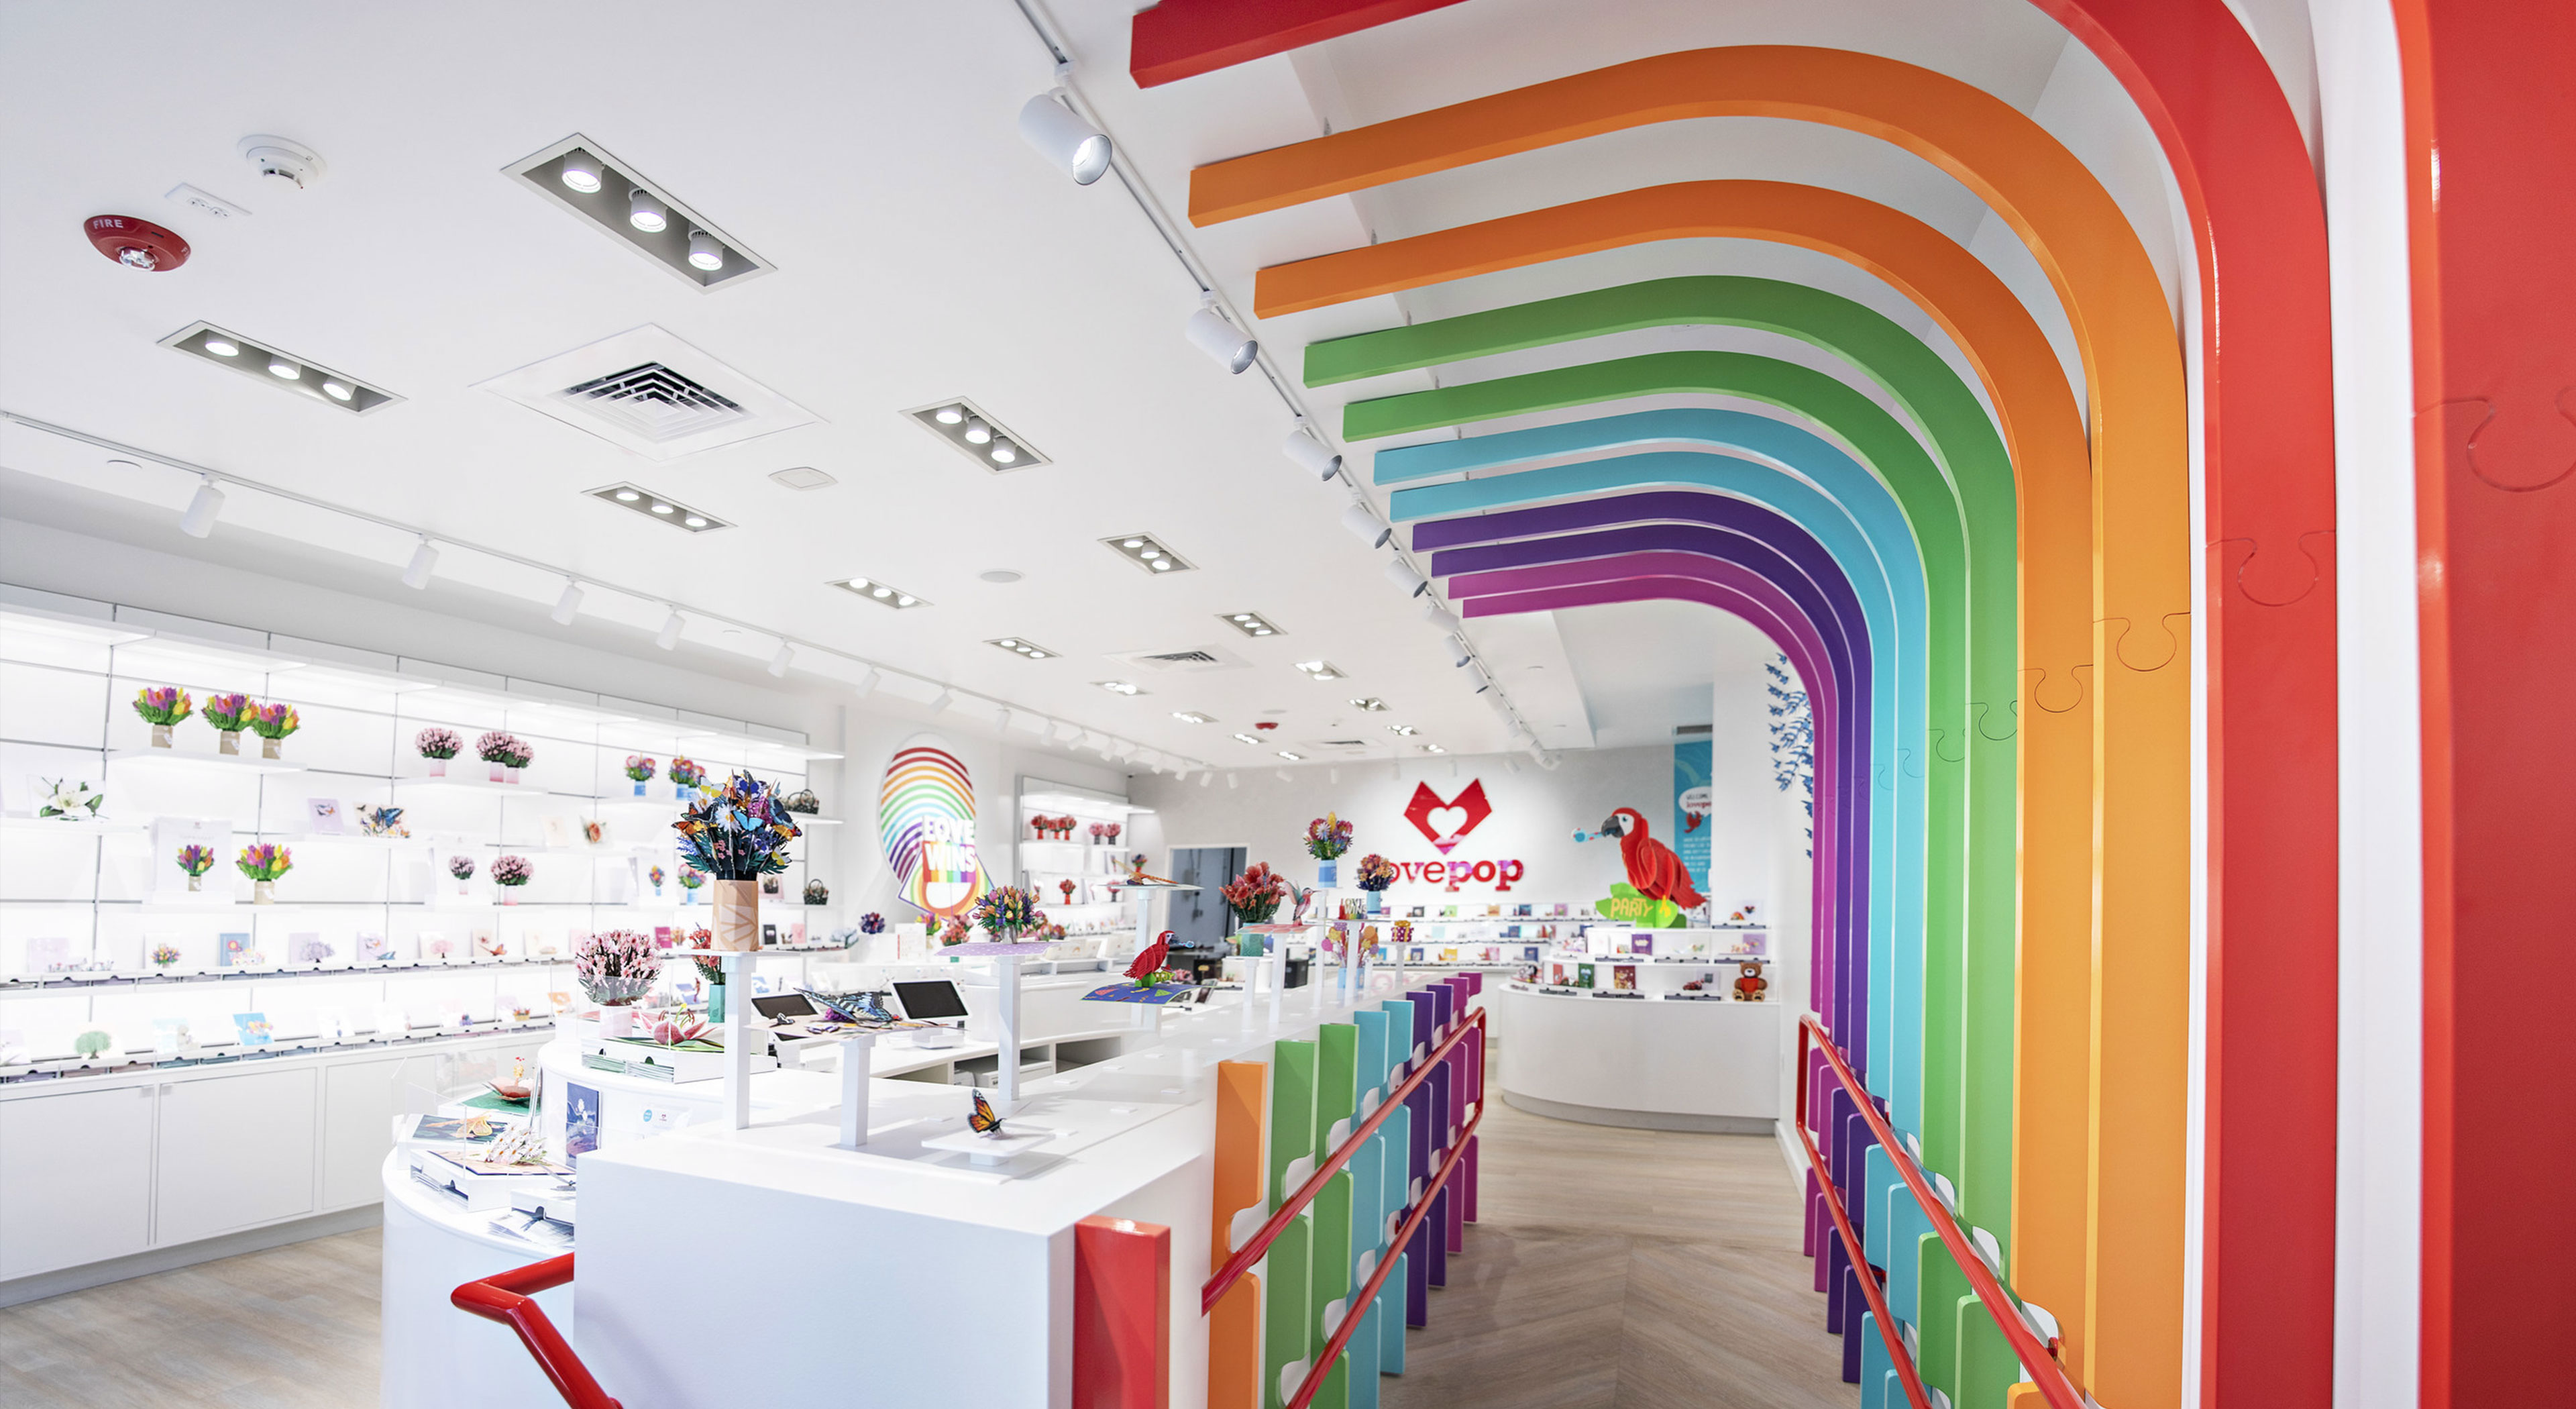 Harvard Square is Lovepop’s largest retail location and will stock the company’s full range of 3D product offerings.